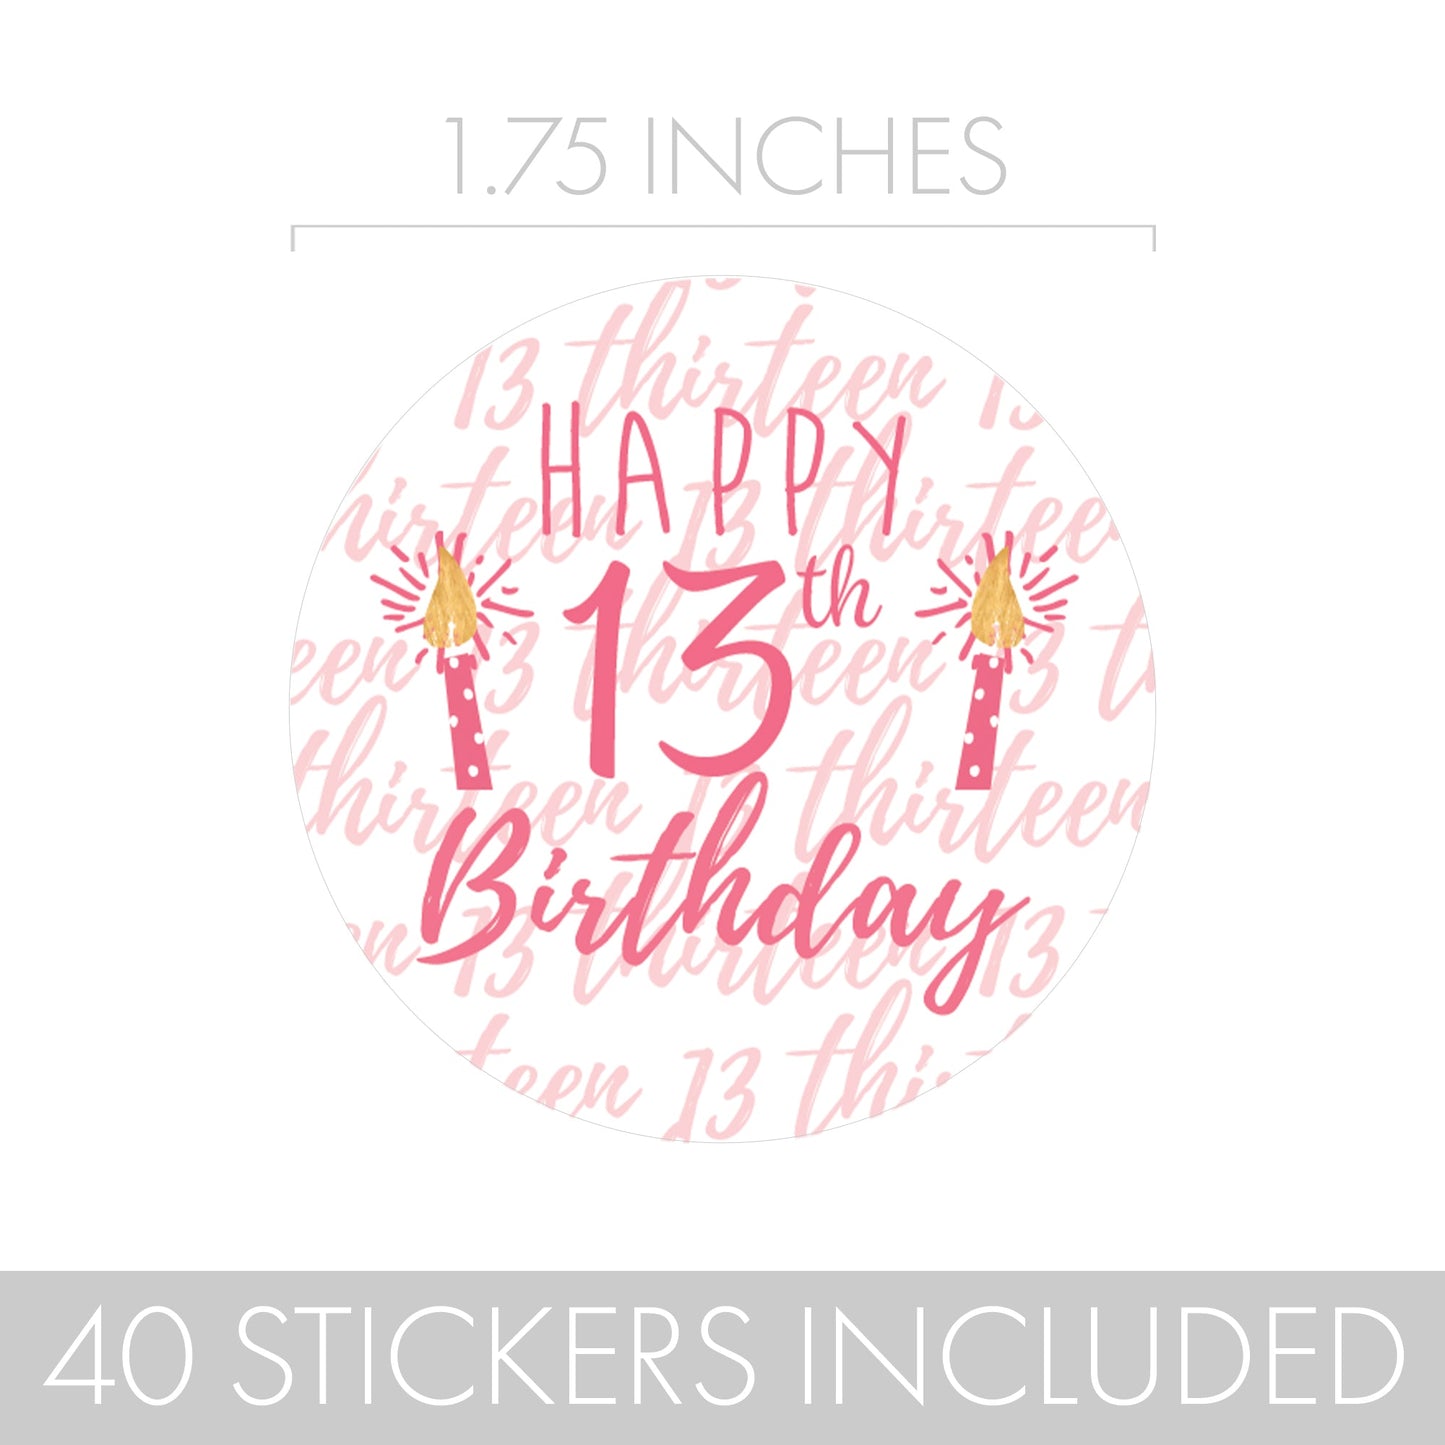 Personalize Your Party - Get 40 Stickers to Match Your Pink and Gold 13th Birthday Theme.